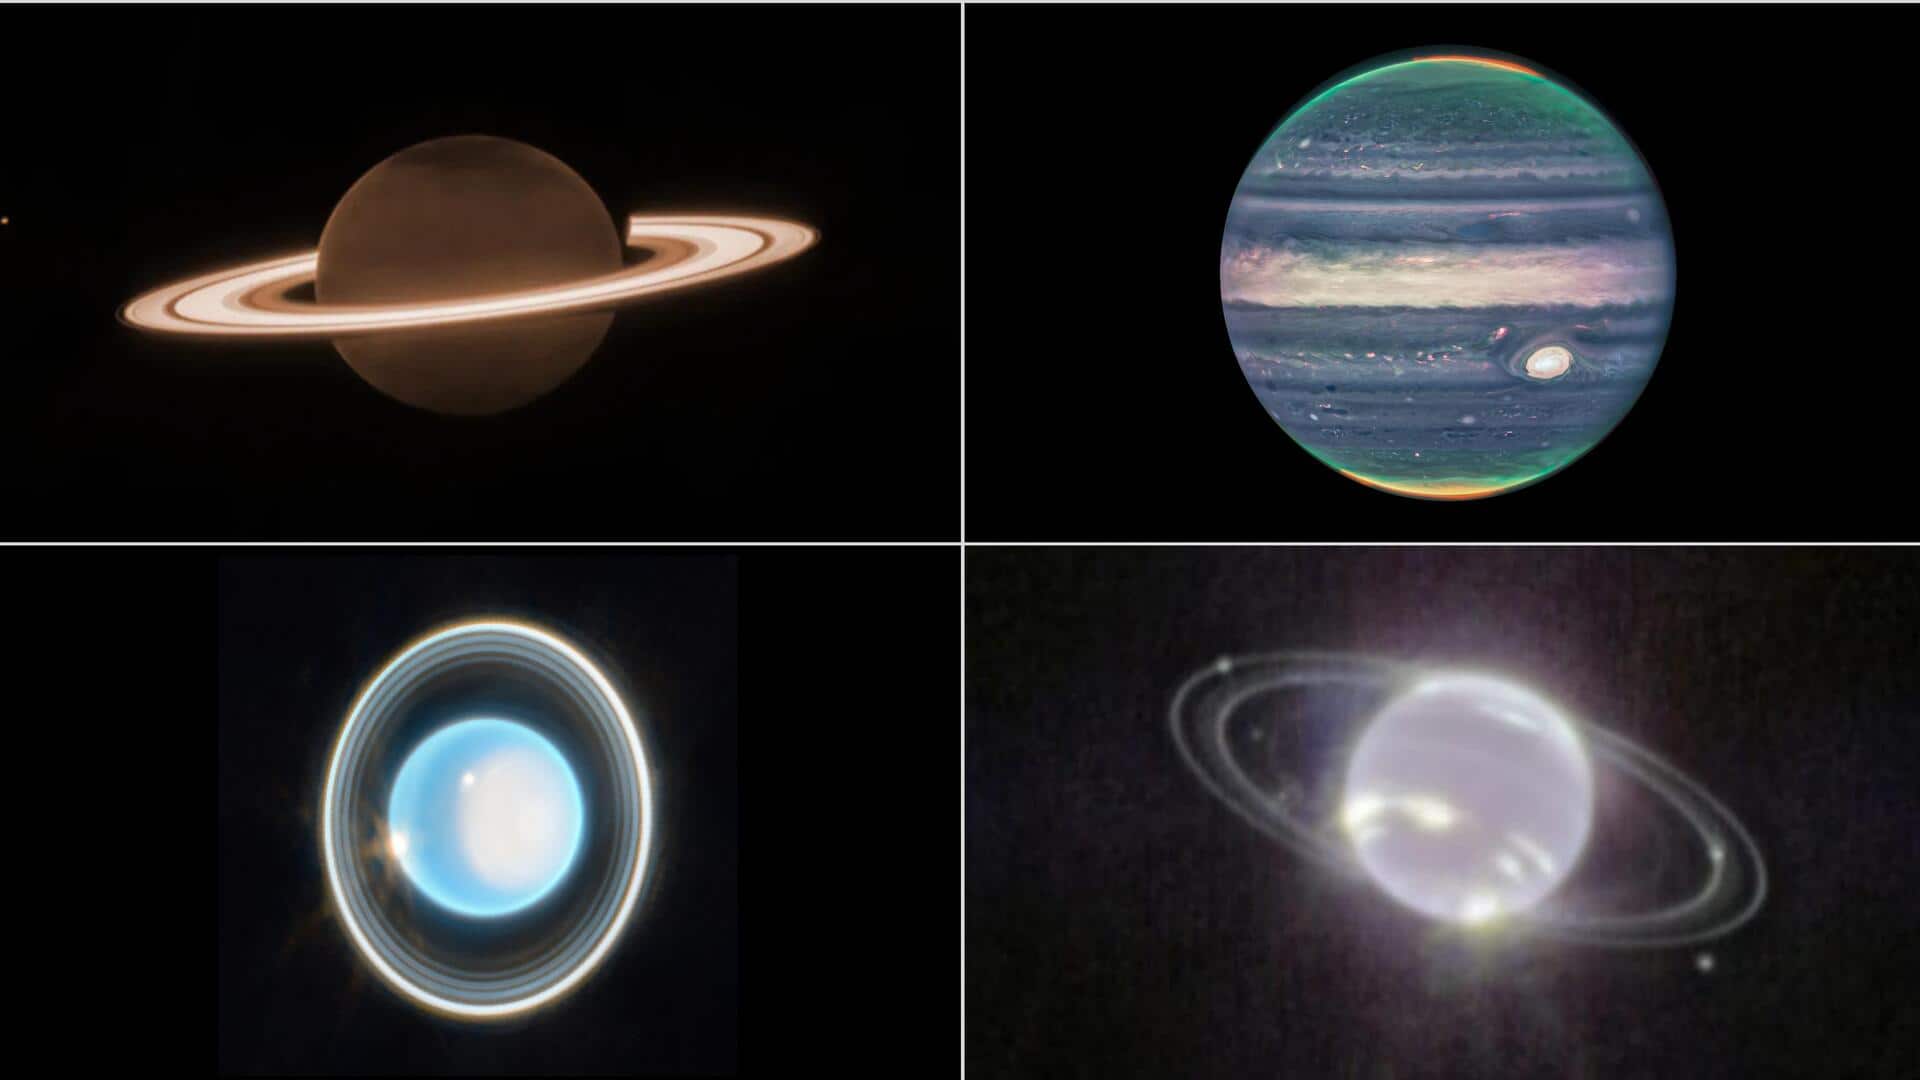 JWST completes stunning visual collection of solar system's giant planets